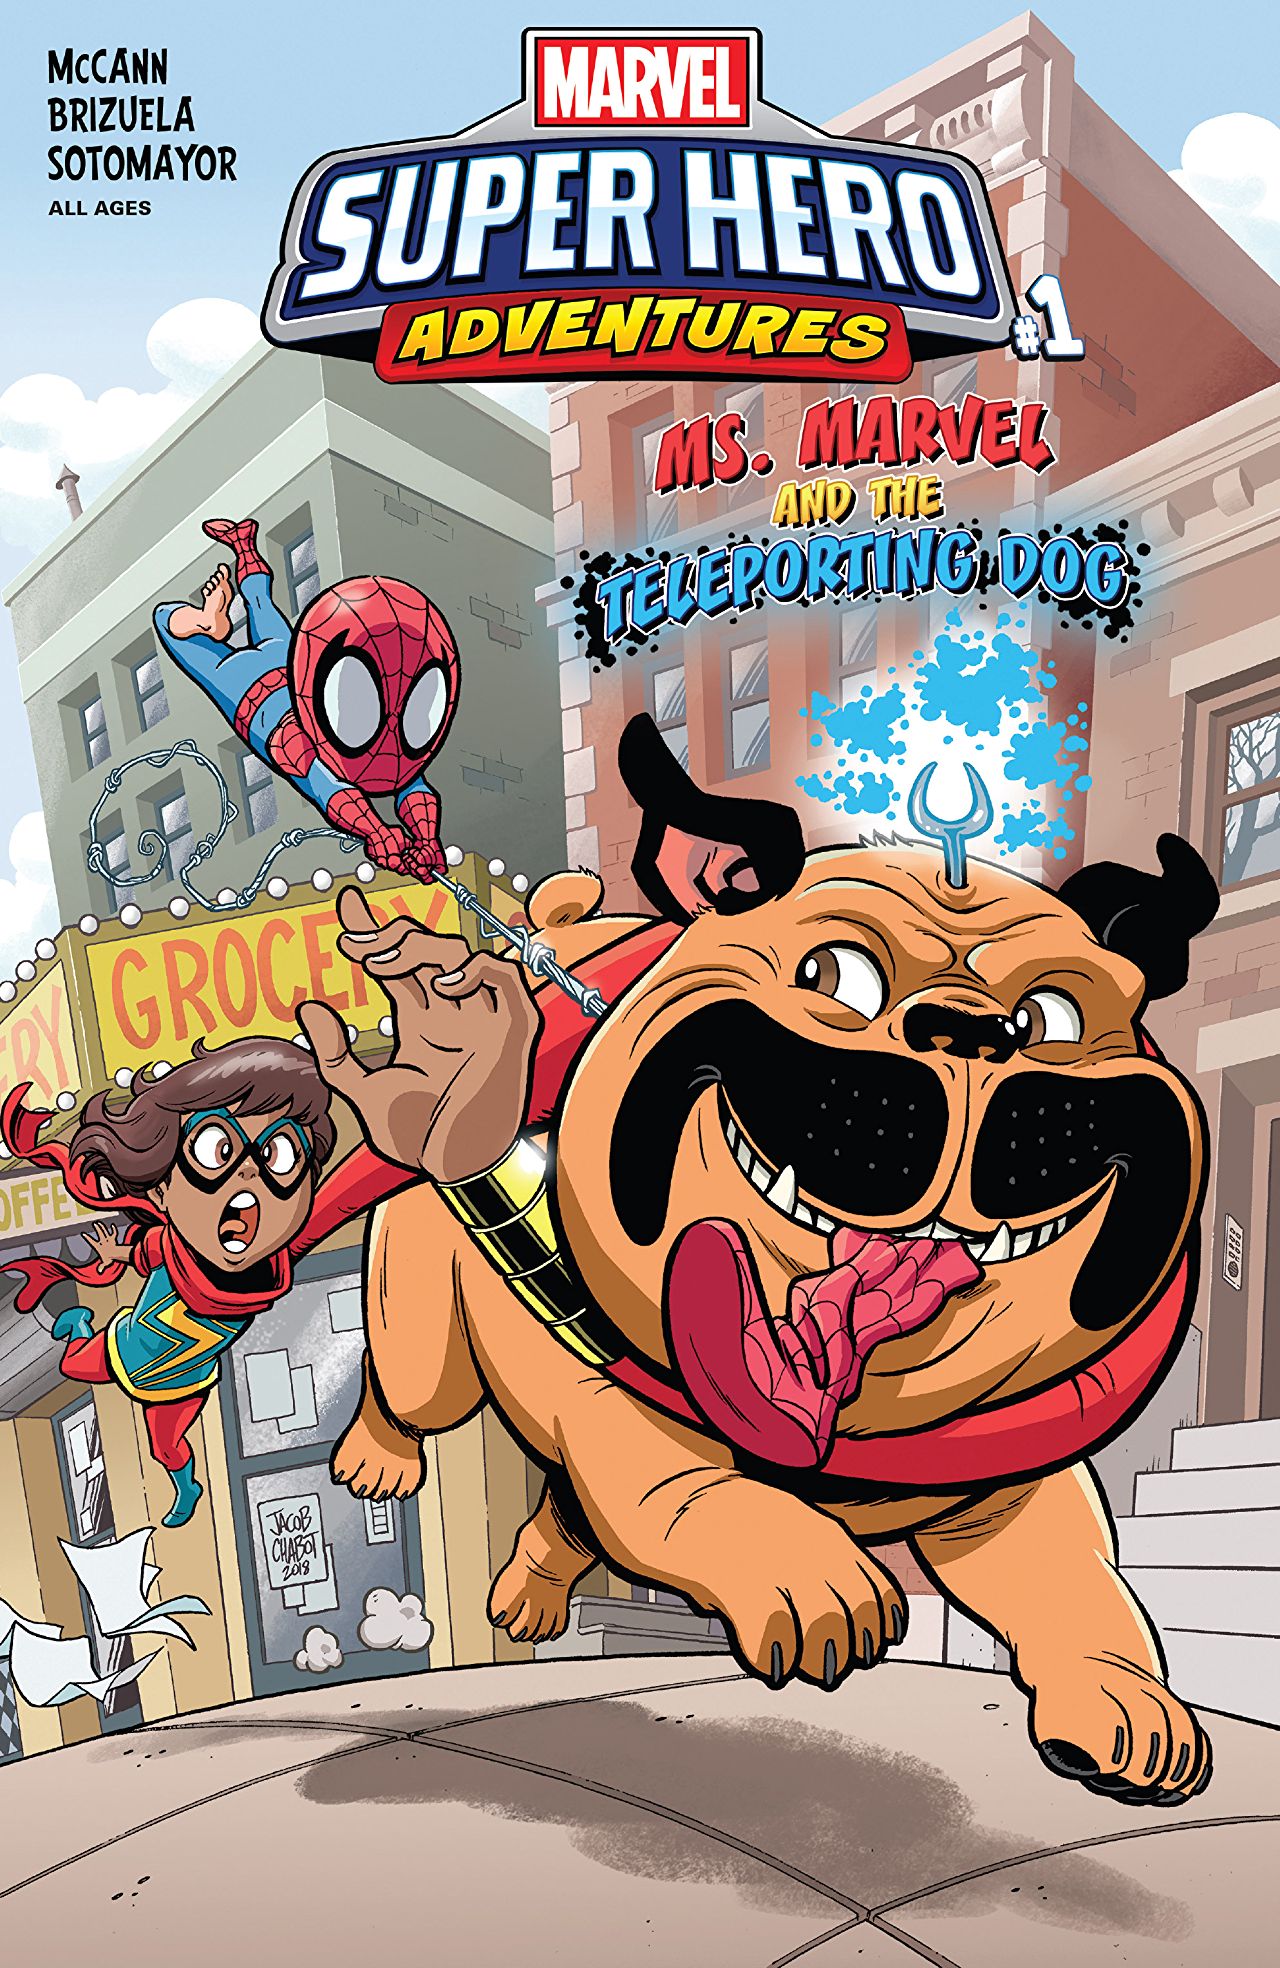 Marvel Preview: Marvel Super Hero Adventures: Ms. Marvel and the Teleporting Dog #1